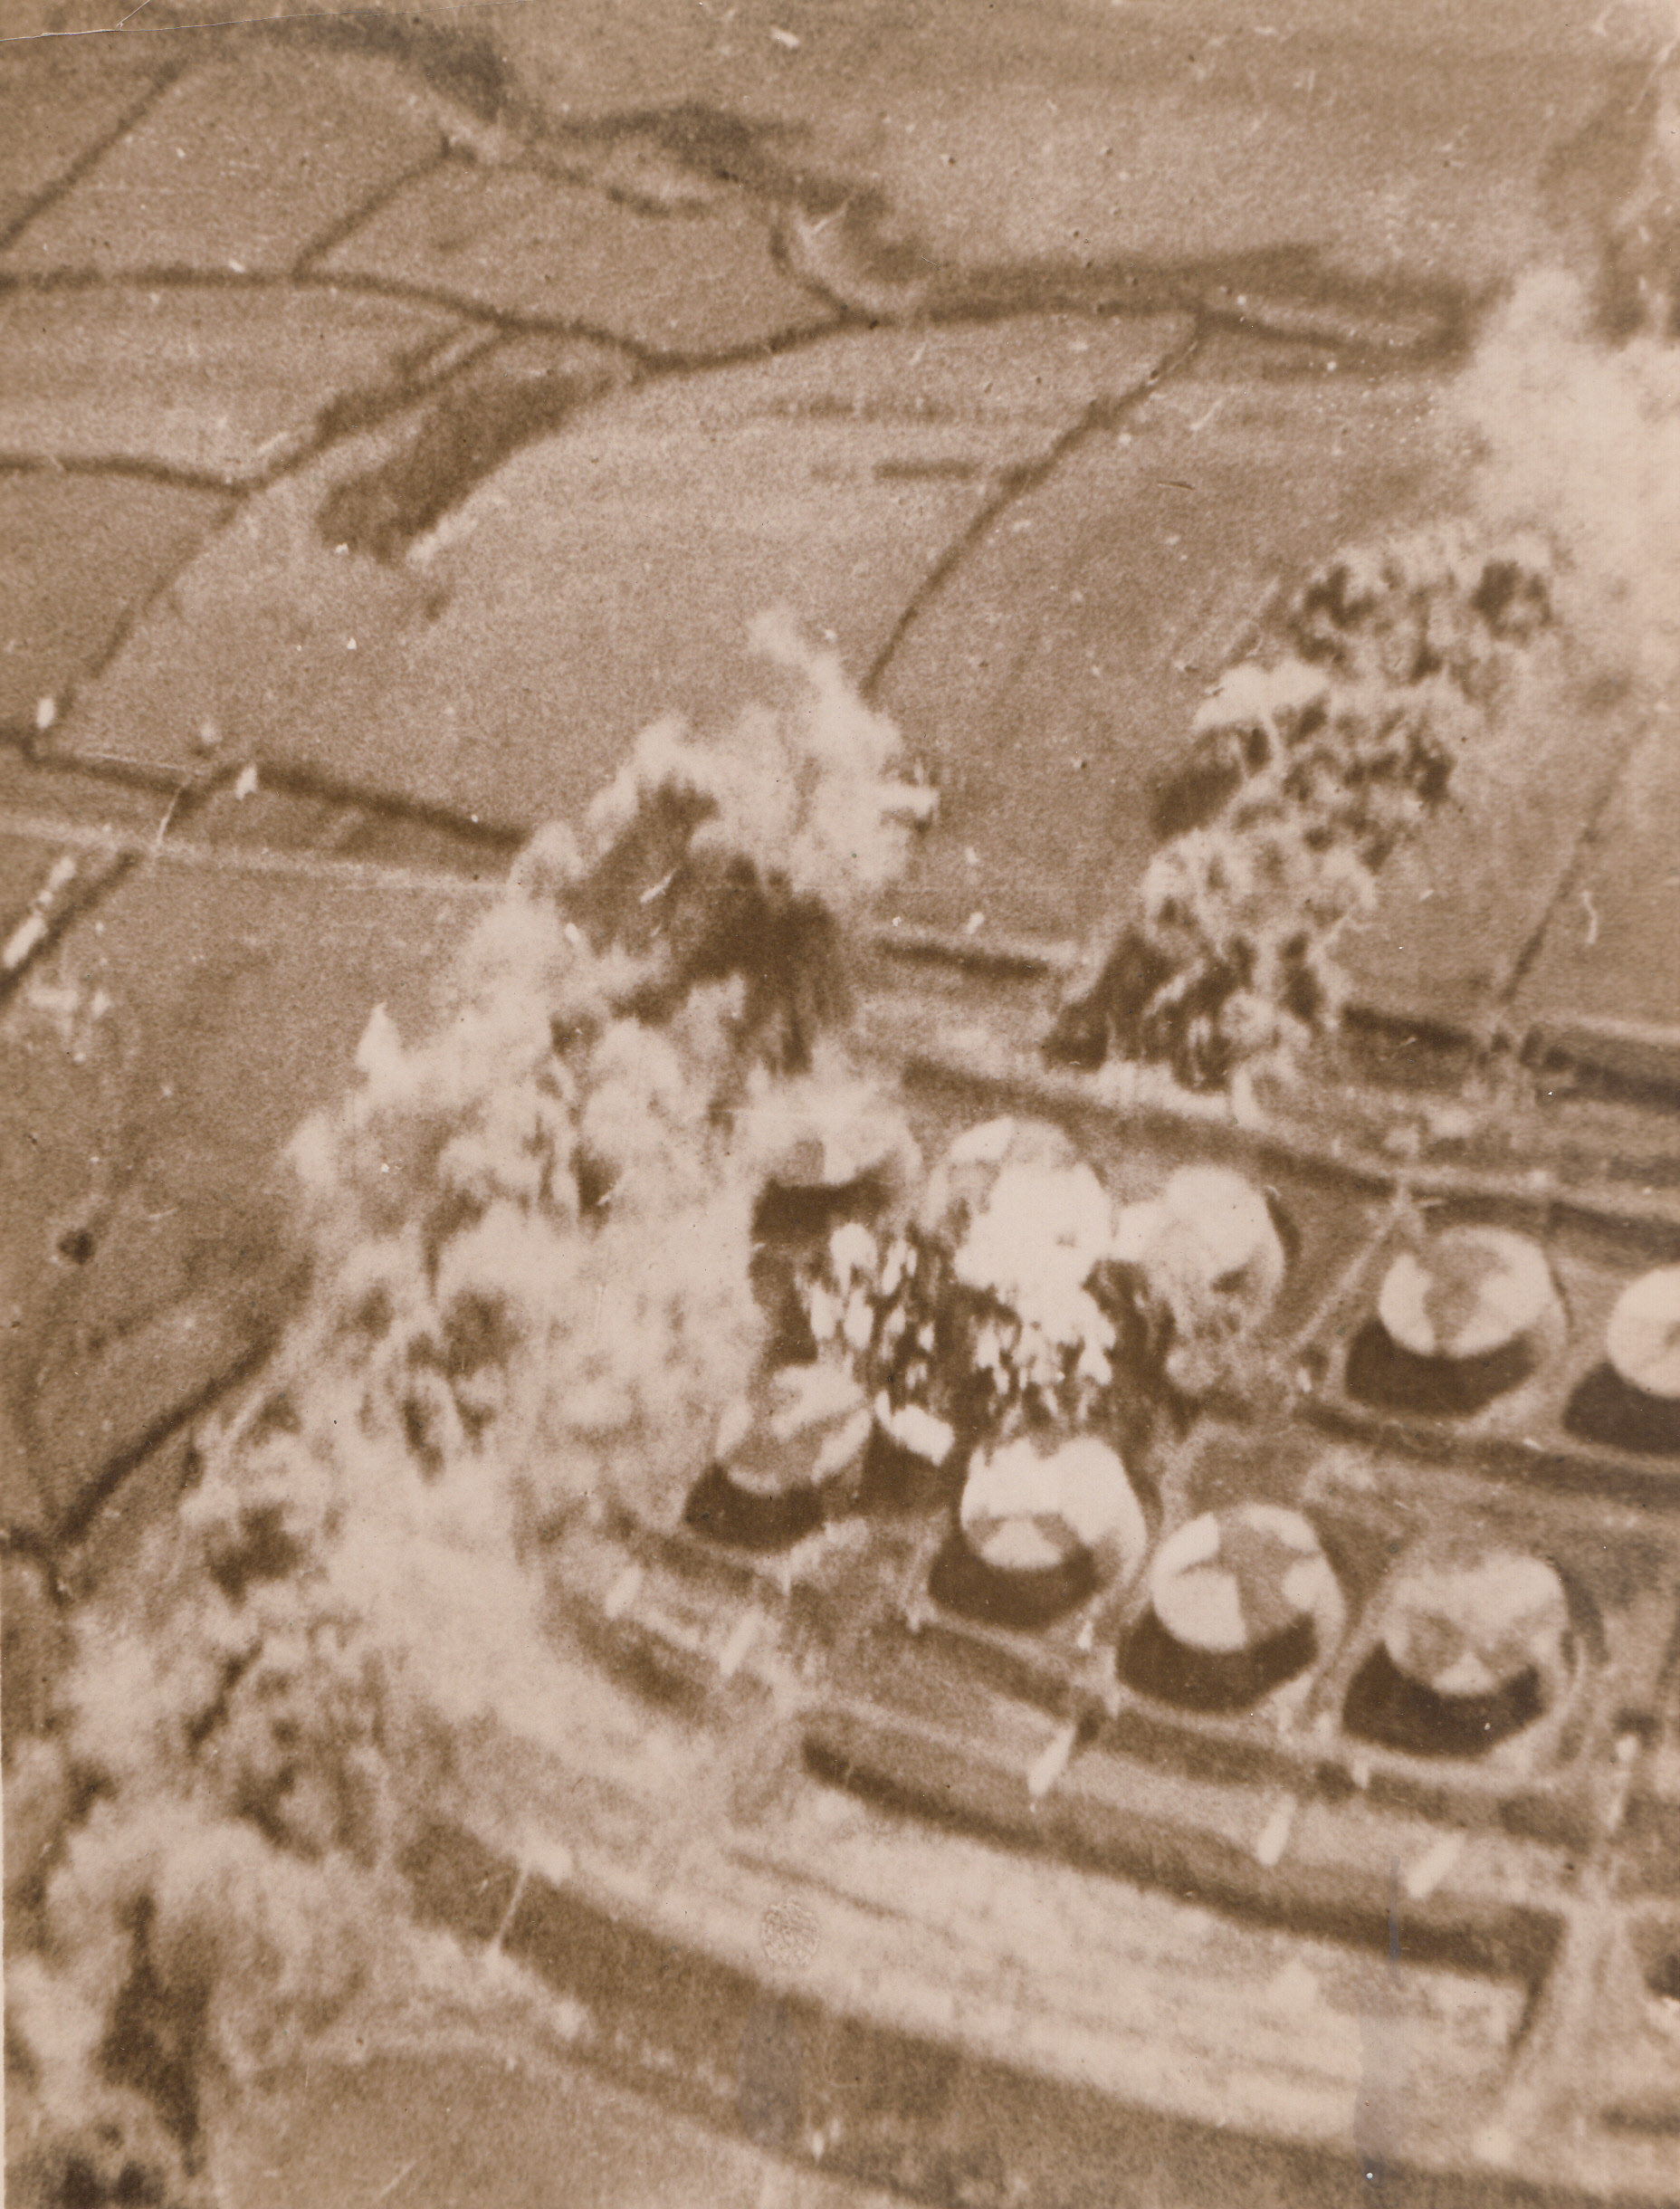 German Bombs Fire British Oil Tanks, 12/29/1940  ENGLAND – British oil storage tanks at Pembroke Dock burning, after bombing by German planes, according to Berlin-approved caption.;